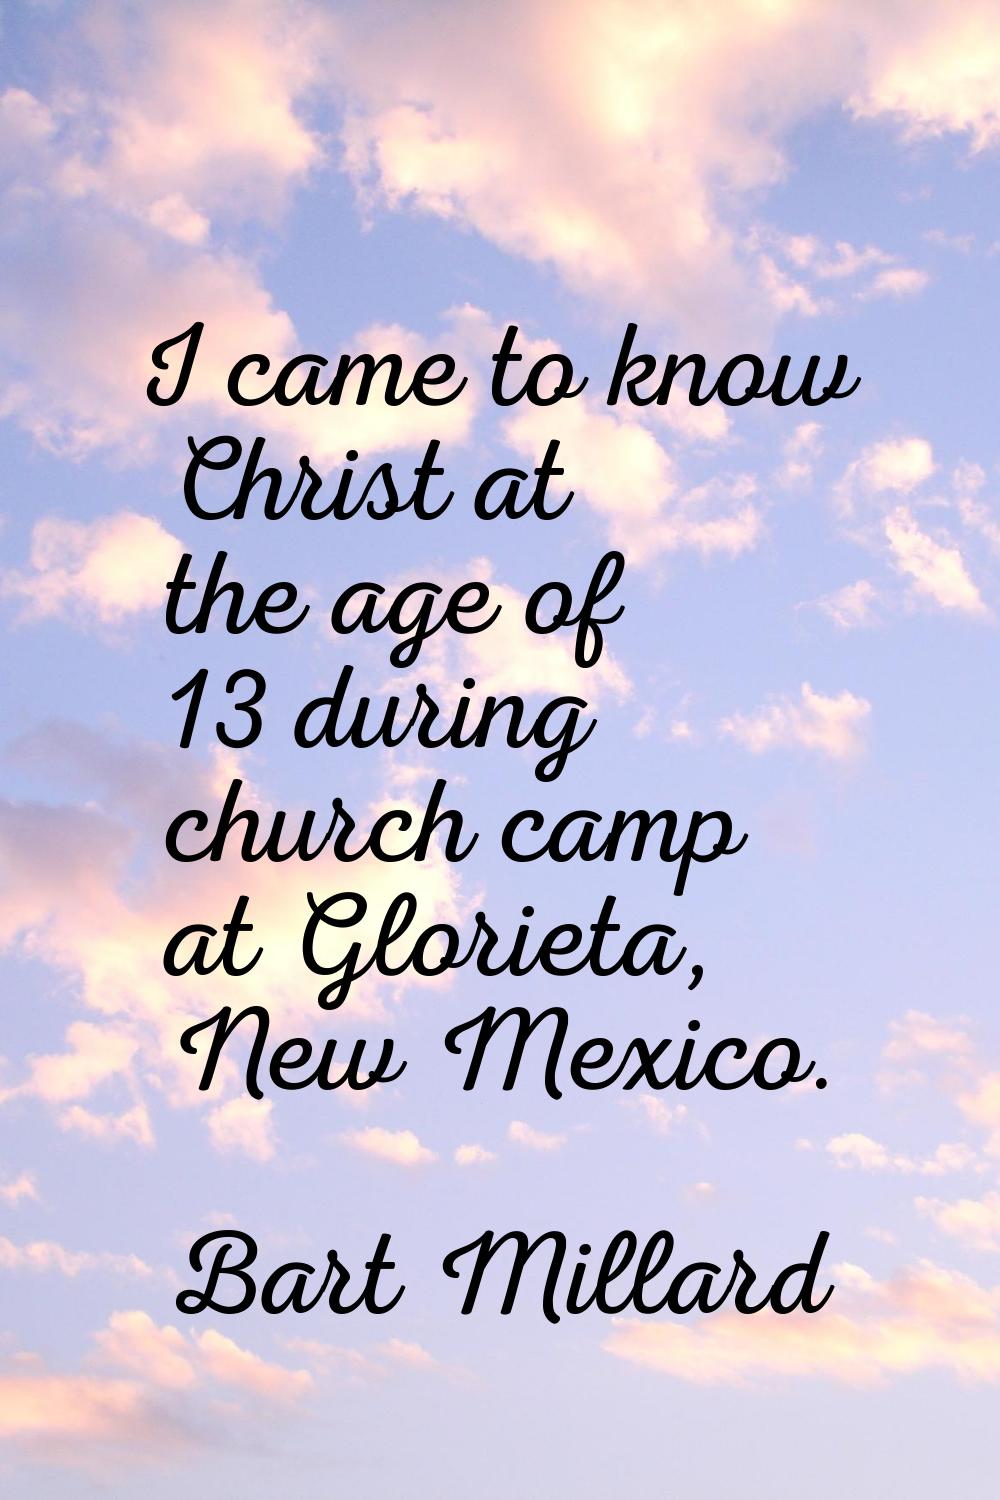 I came to know Christ at the age of 13 during church camp at Glorieta, New Mexico.